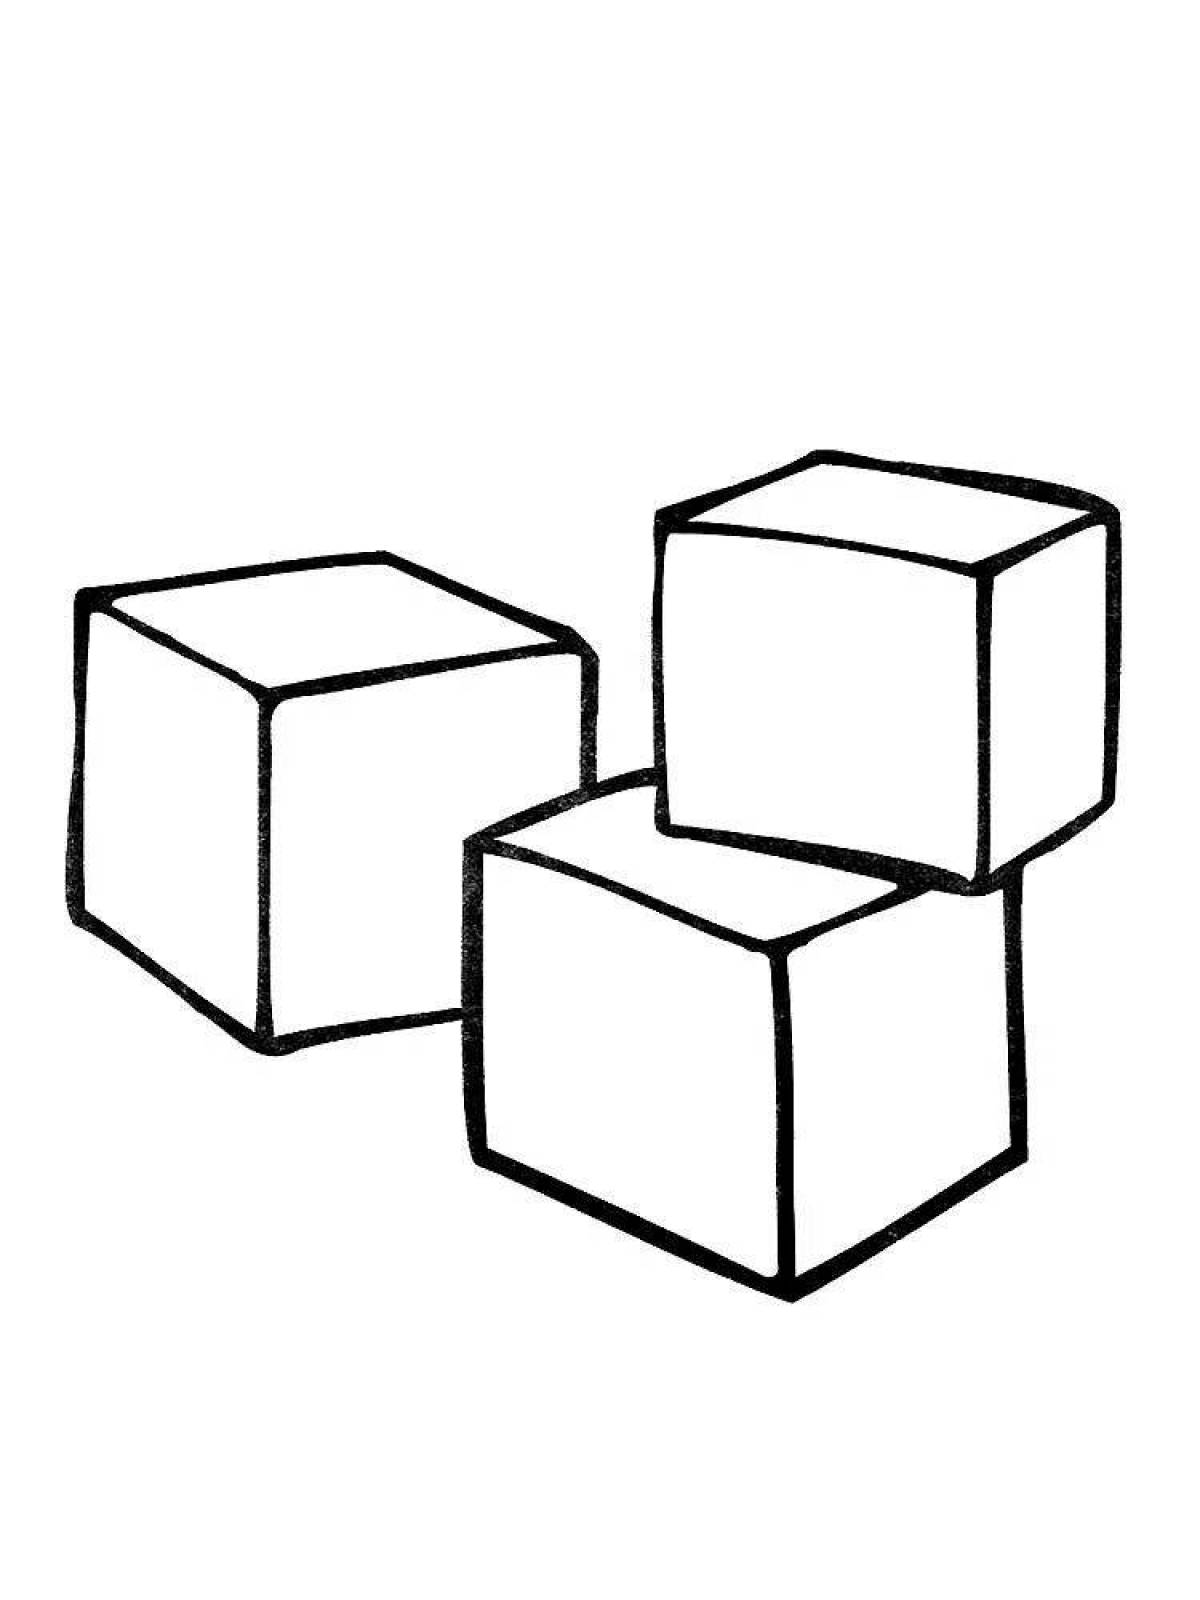 Charming cube coloring page